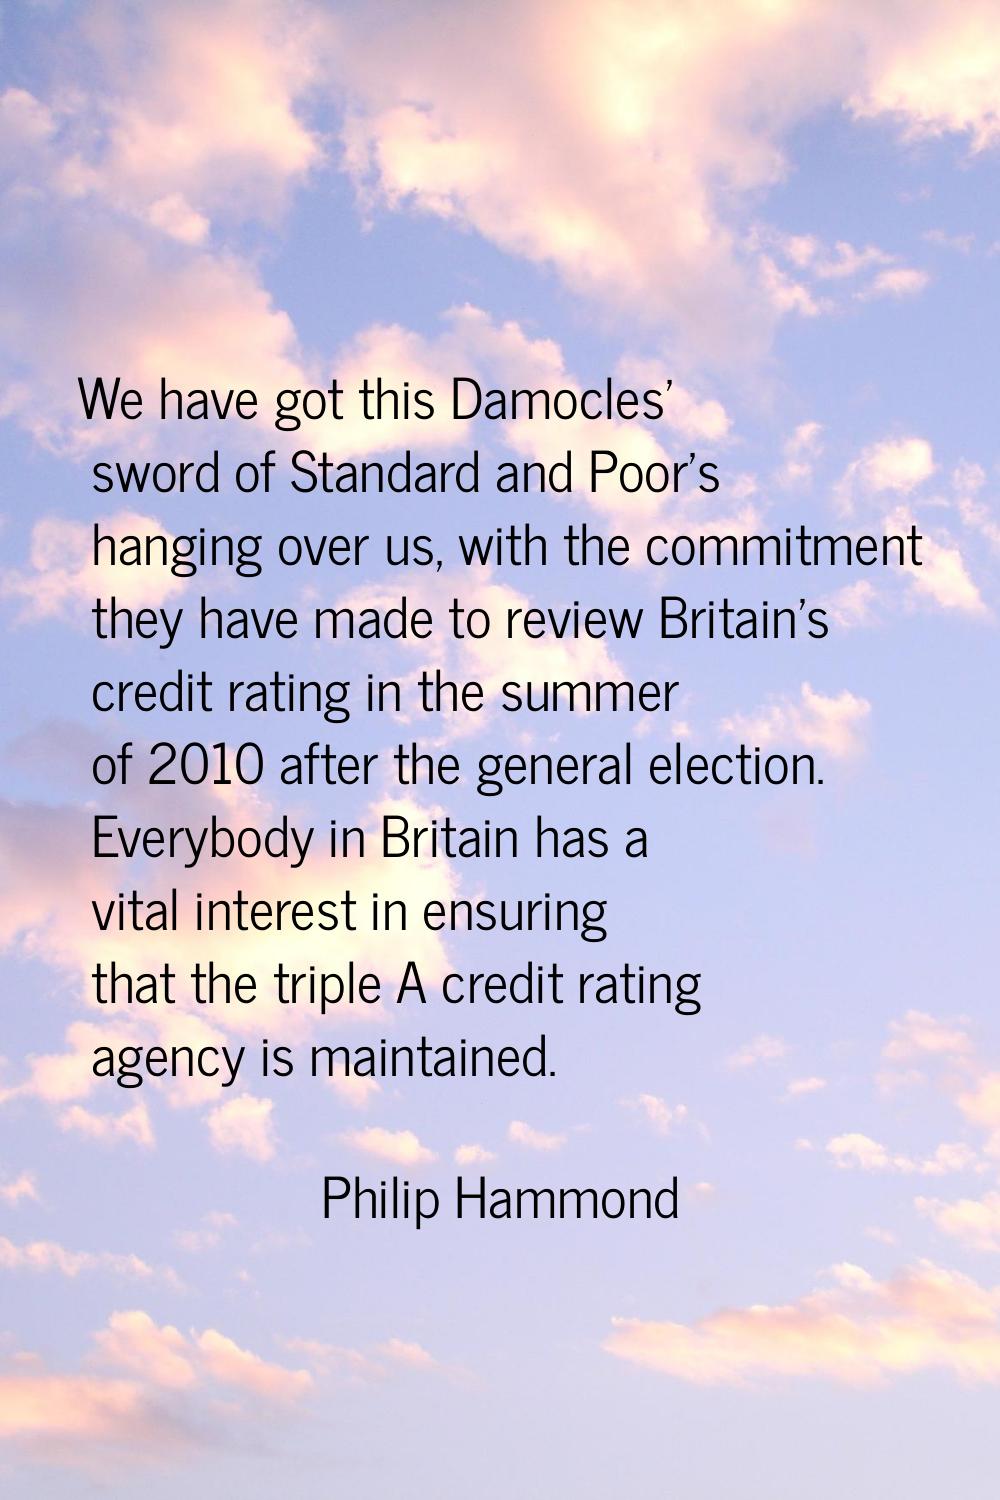 We have got this Damocles' sword of Standard and Poor's hanging over us, with the commitment they h